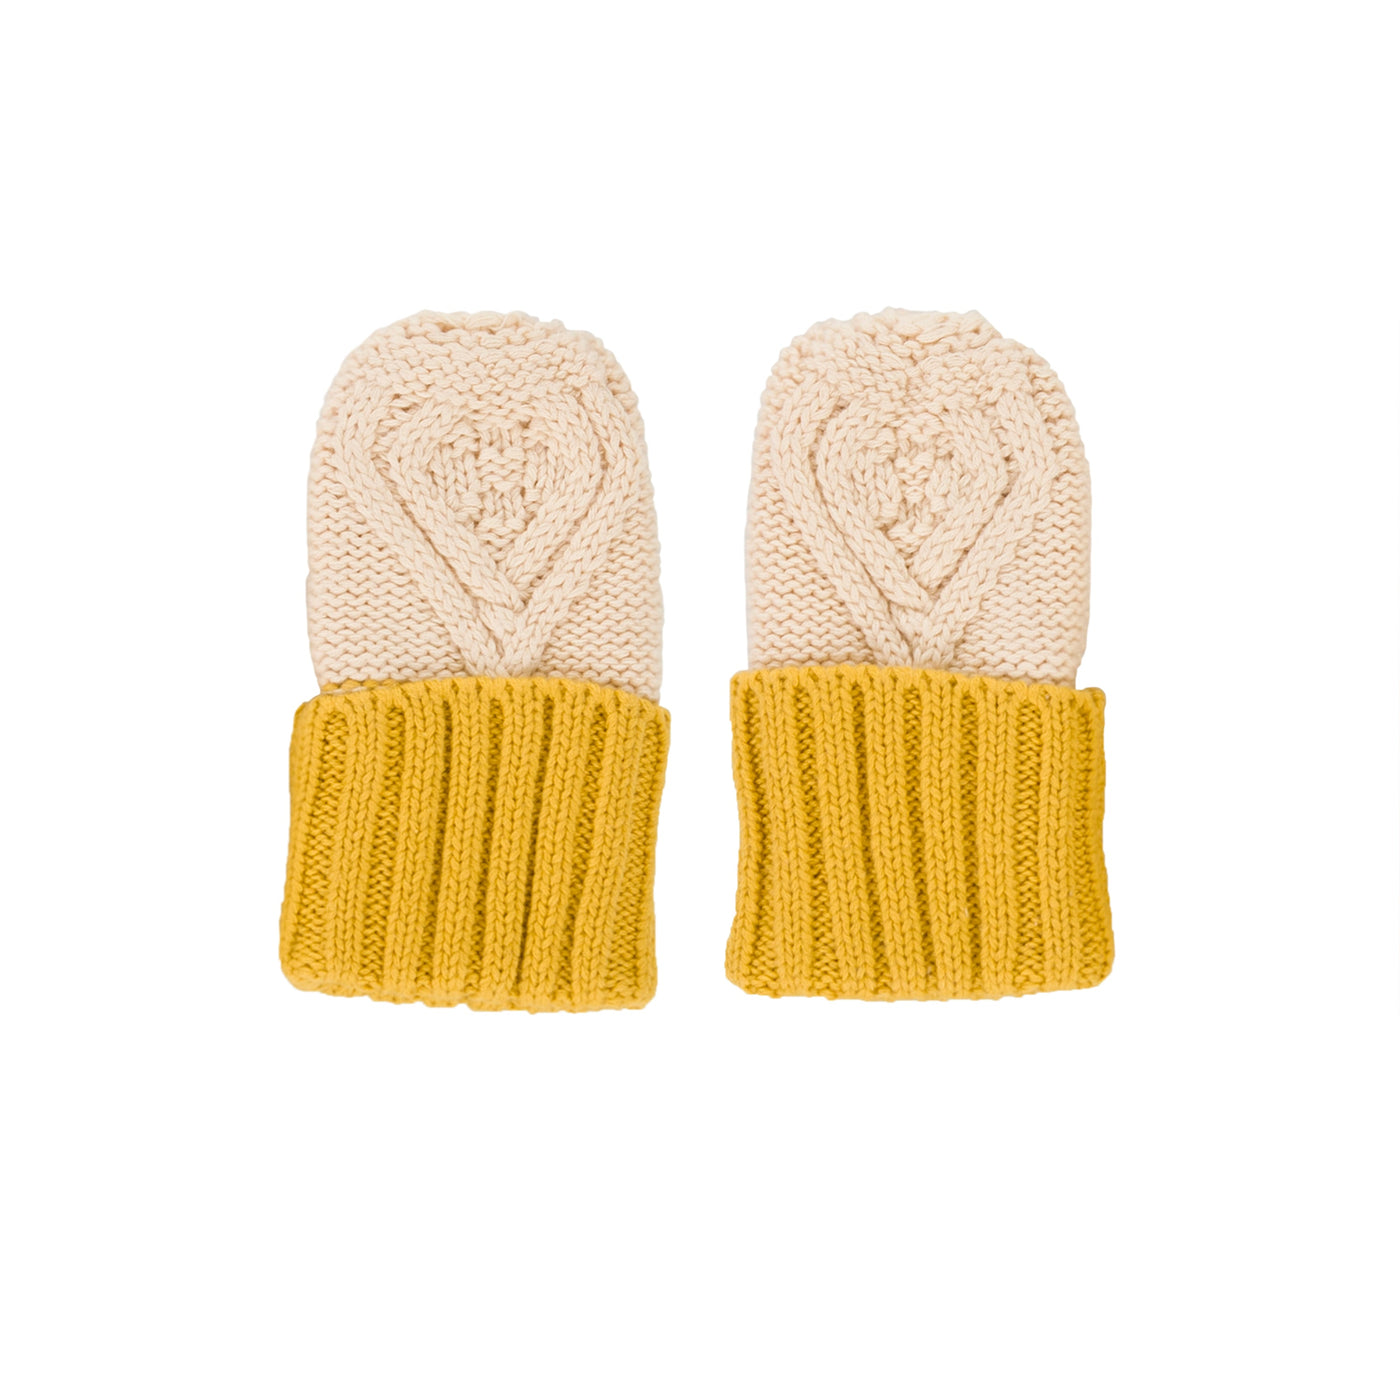 Cable Knit Mittens - Oatmeal & Mustard Mittens Acorn Kids 